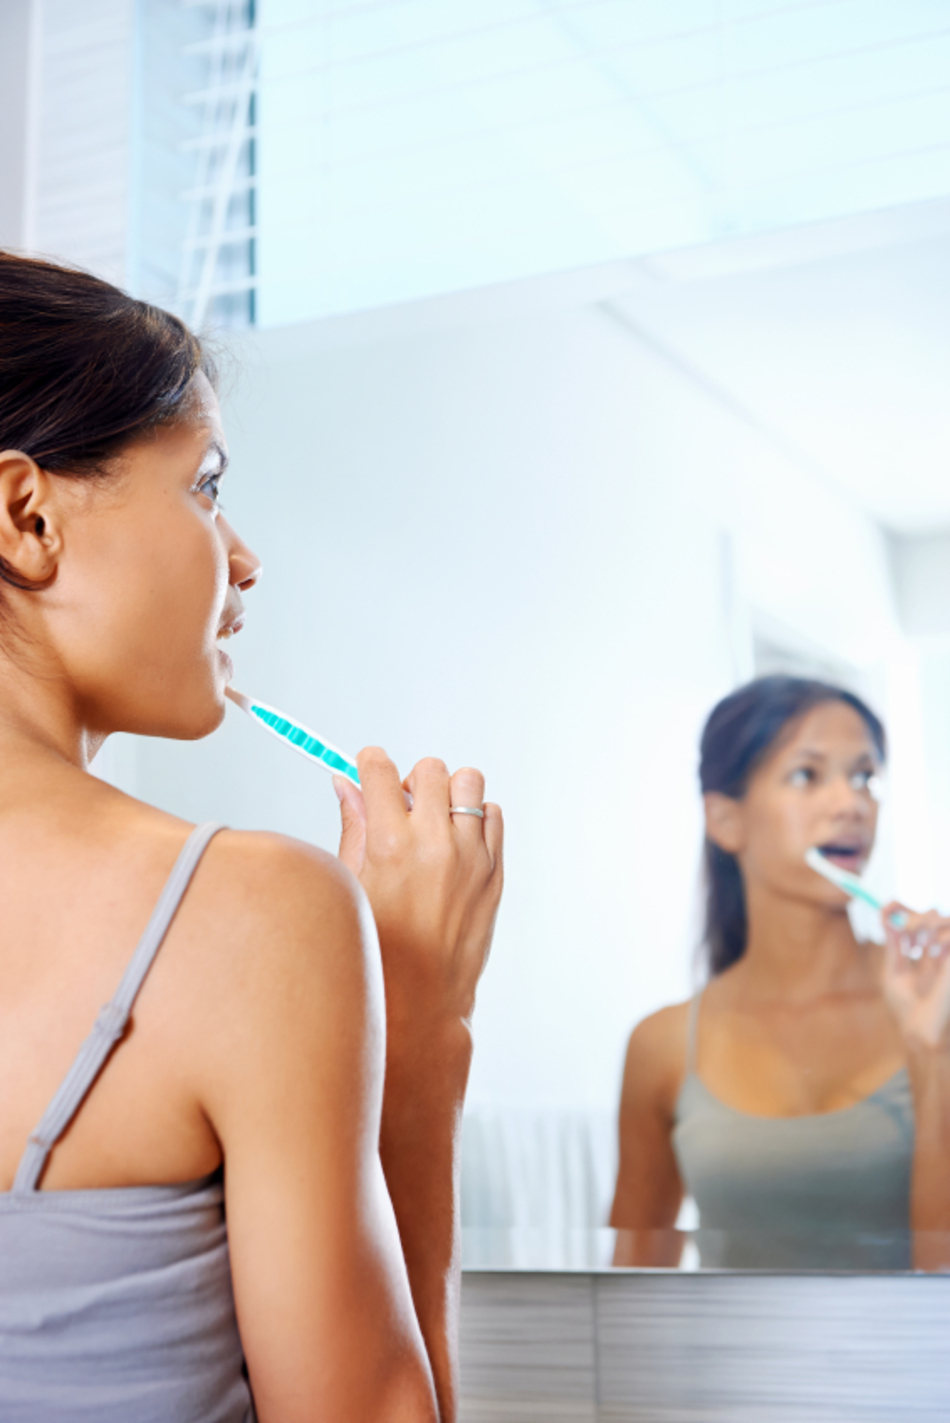 How Pregnancy and Your Menstrual Cycle Can Affect Your Oral Health